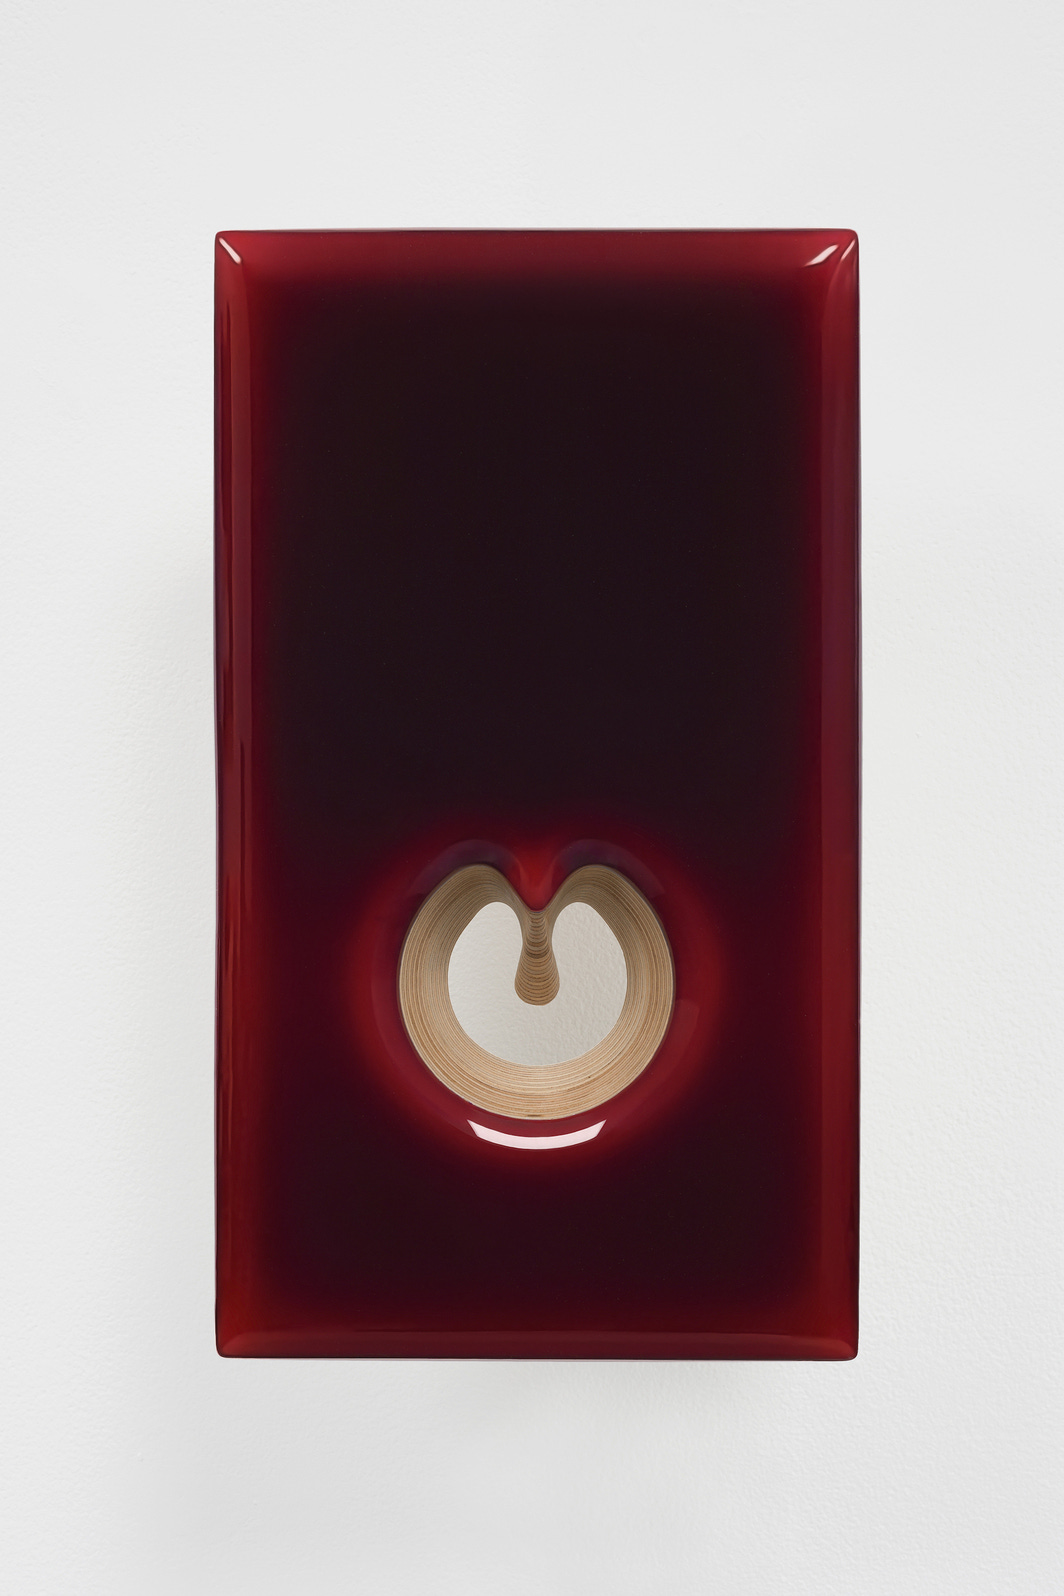 Donald Moffett, Lot 080820 (open red), 2020, Pigmented epoxy resin and acrylic, wood panel, steel, 14 x 8 x 5 3/4''.